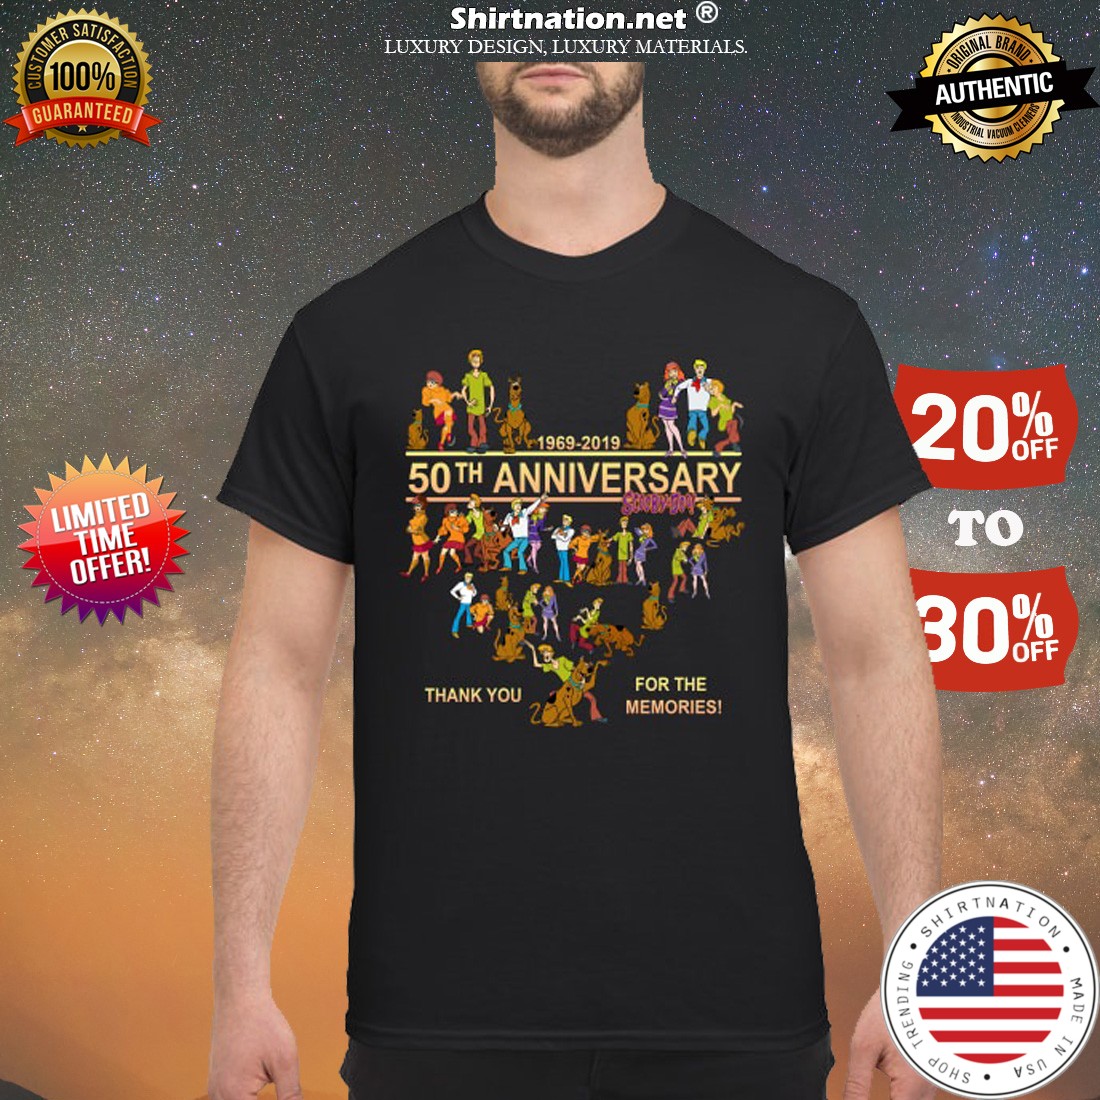 Scooby doo 1969 2019 anniversary thank you for the memories shirt